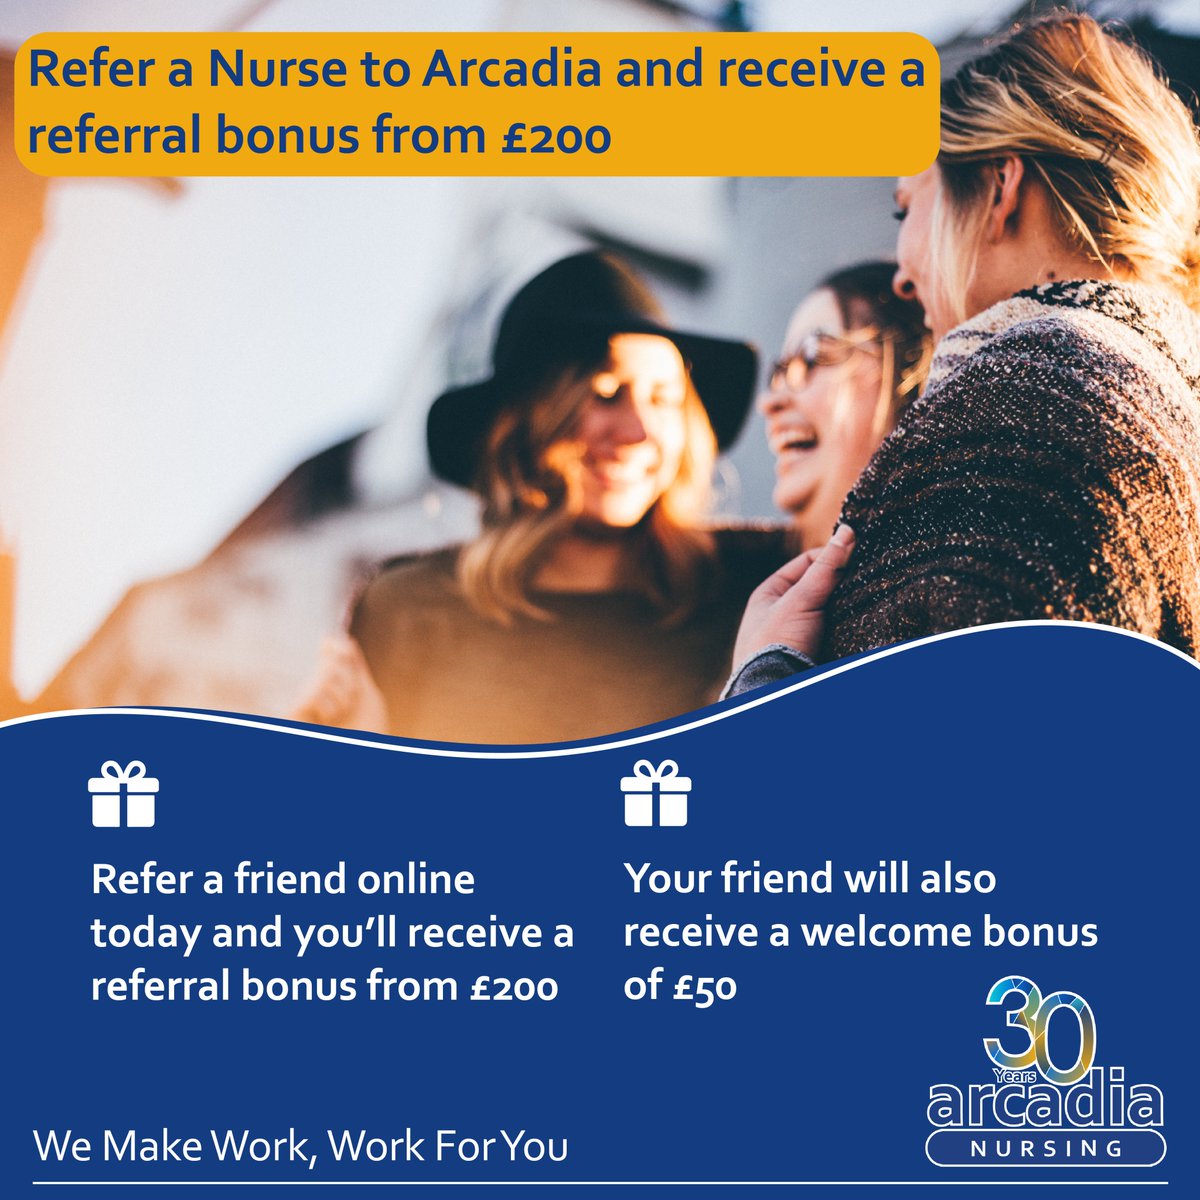 👩‍⚕️Did you know we offer a refer a friend scheme to Arcadia workers who refer Nurses to us. Receive a referral bonus from £200 and your friend will receive a welcome bonus from £50. Refer your friend online today: arcadianursing.co.uk/refer-a-friend/

#referafriend #nursingjobs #ApplyNow